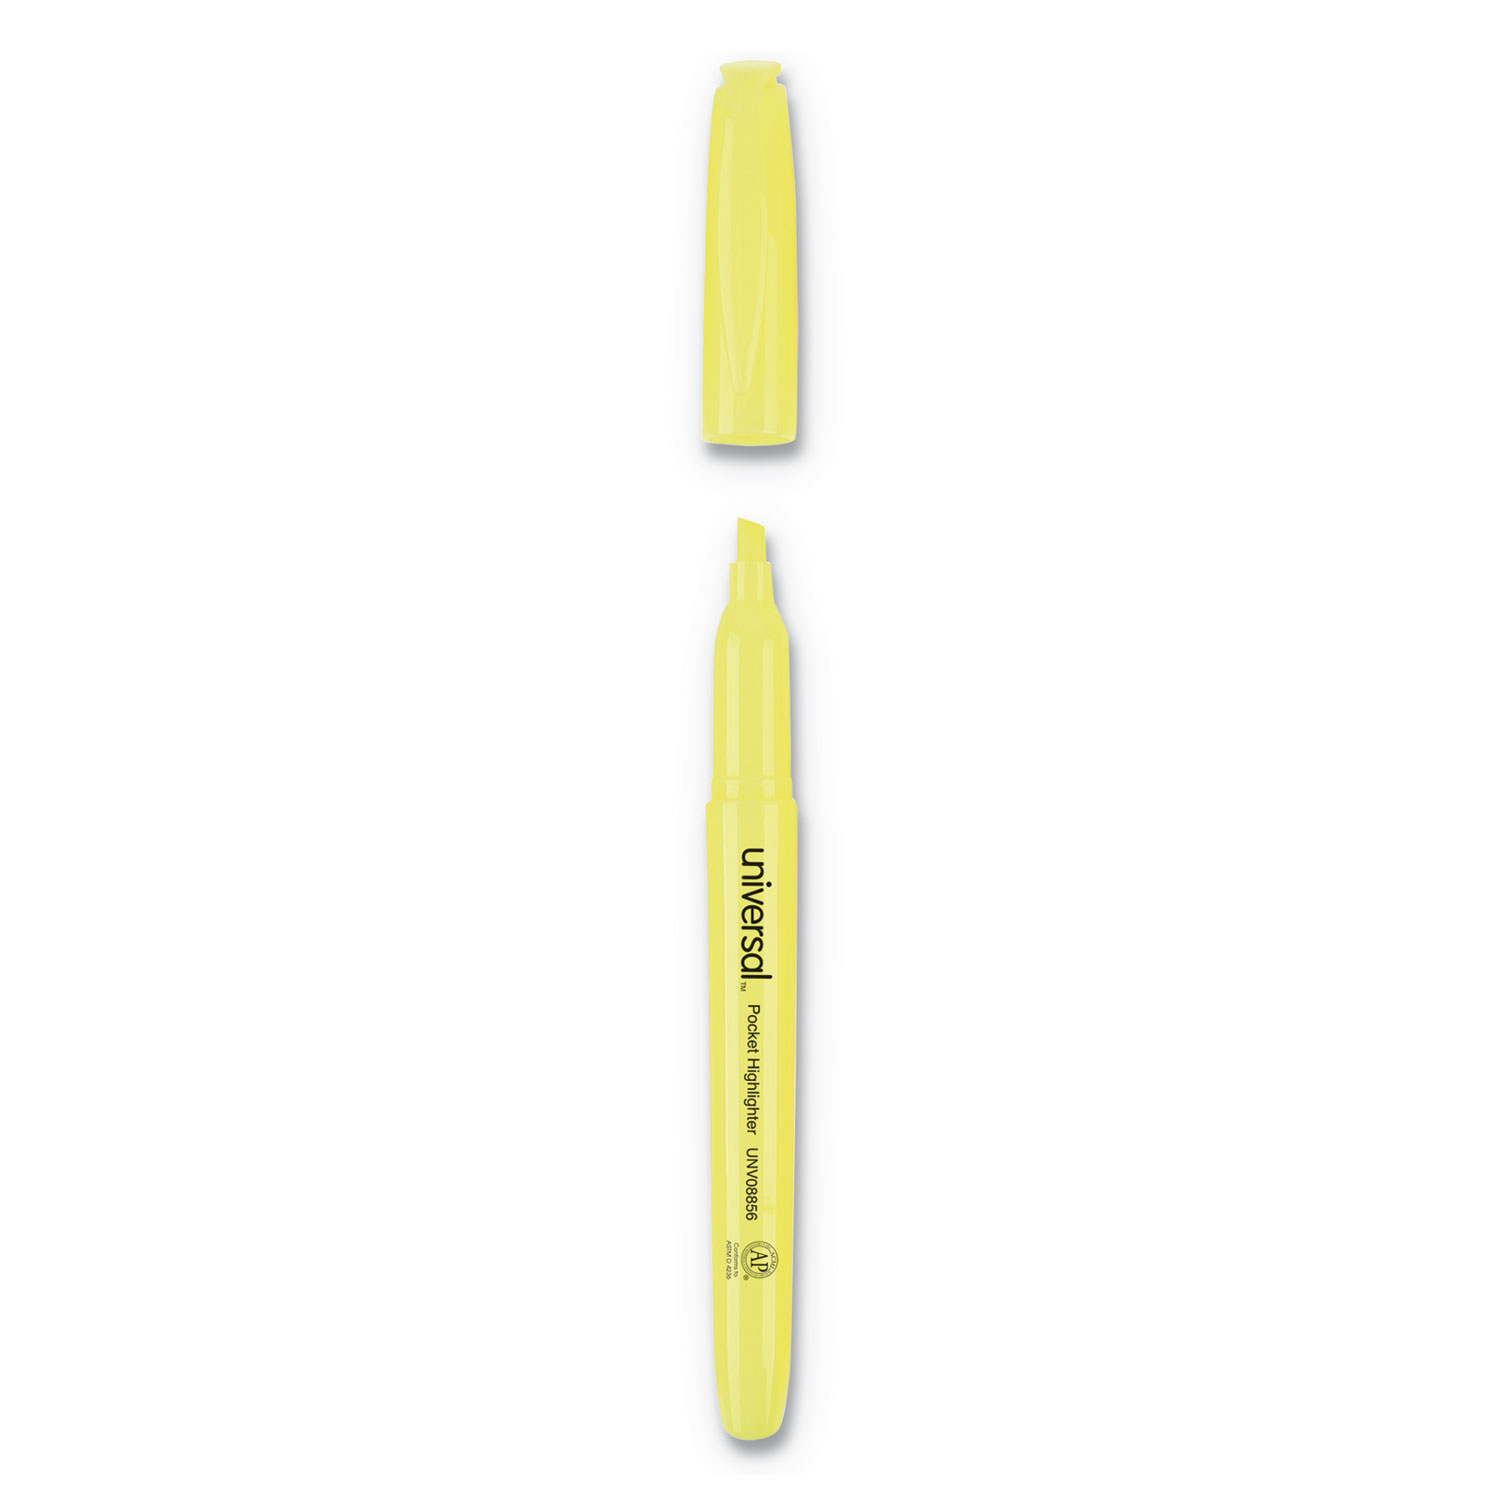 Pocket Clip Highlighter, Chisel Tip, Fluorescent Yellow Ink, 36/Pack